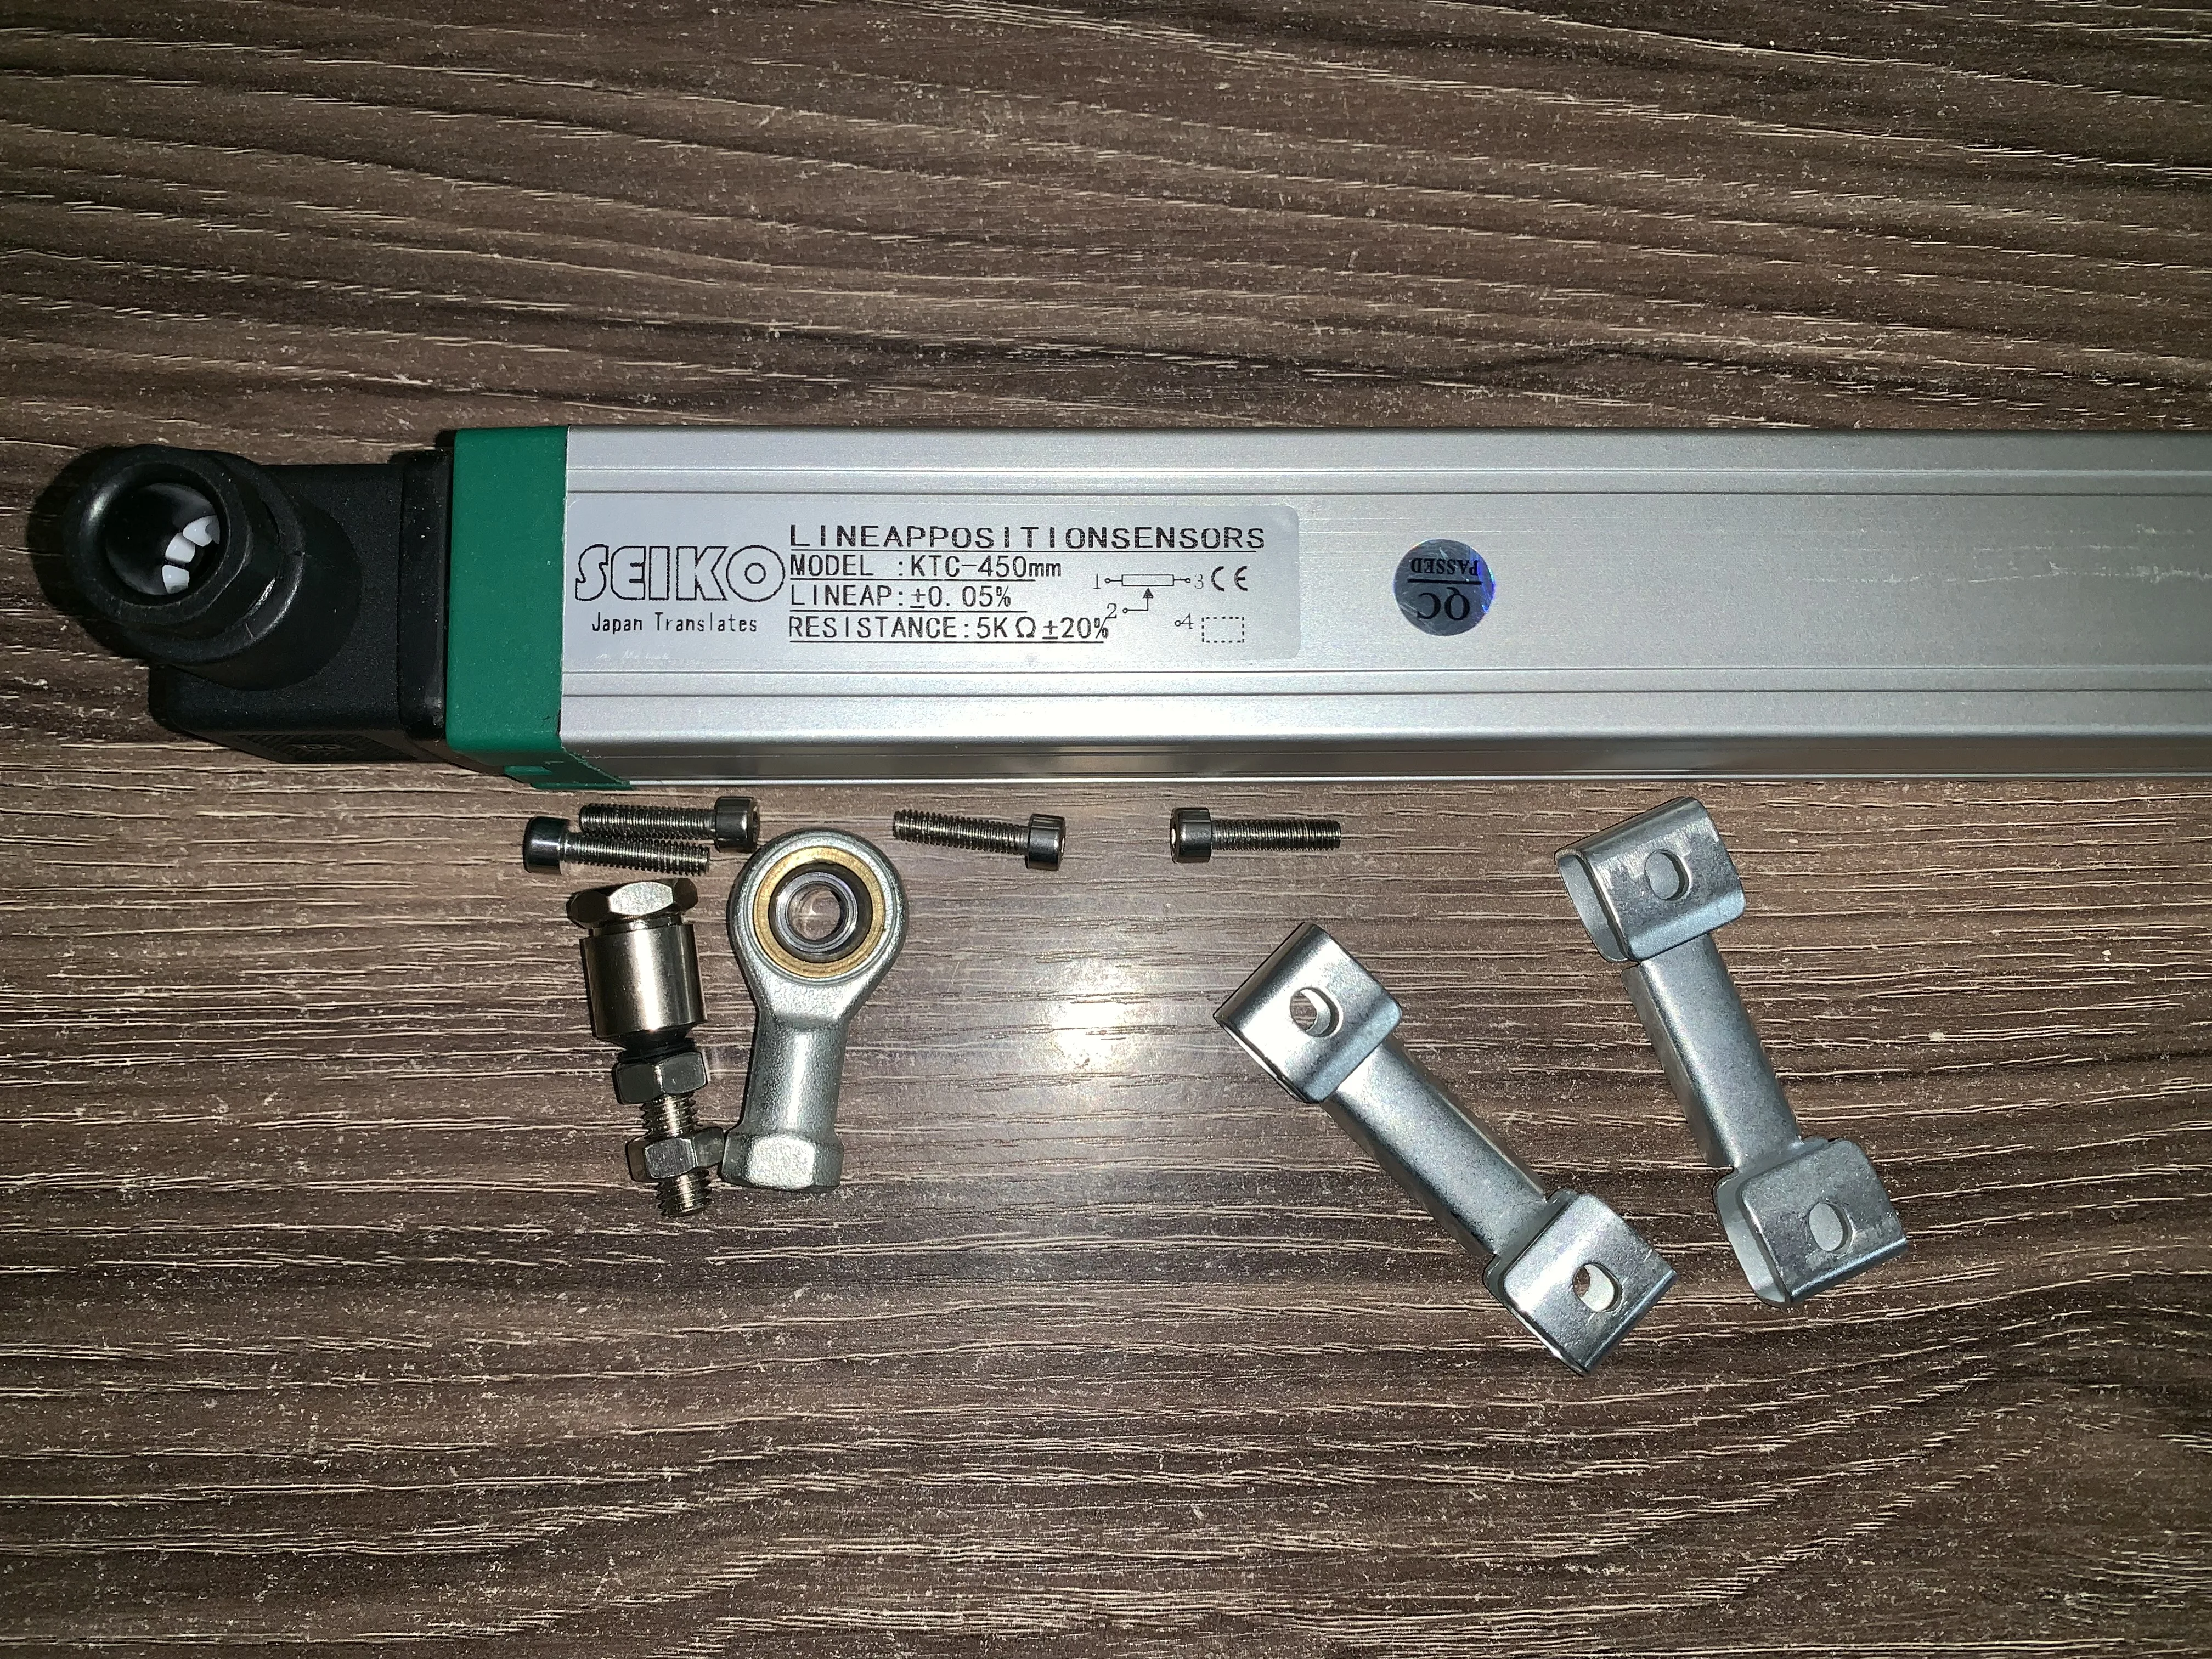 ktc-450mm-ktc-450-rod-electronic-ruler-linear-displacement-transducer-ktc-injection-molding-machine-industry-universal-trolley